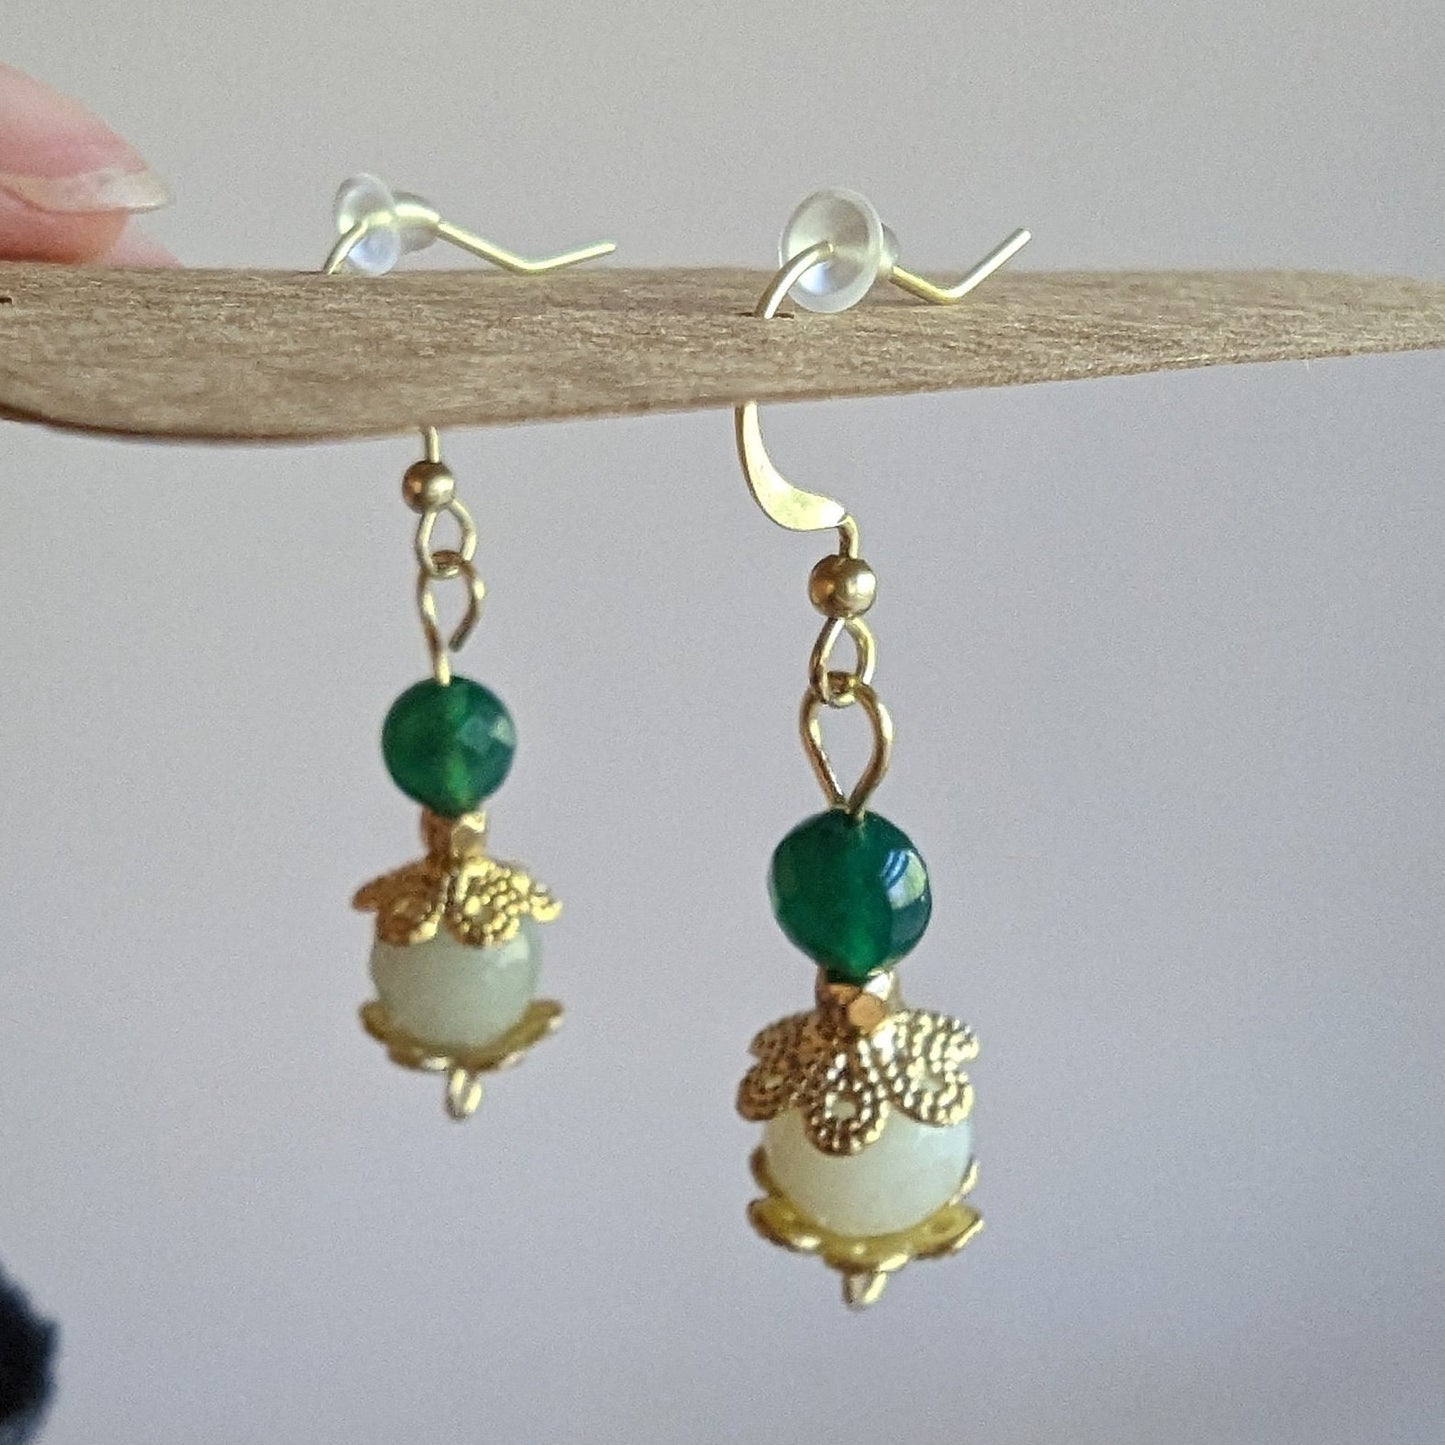 Jade Lantern Minimalistic Earrings Asian Palace Inspired Earrings Collection